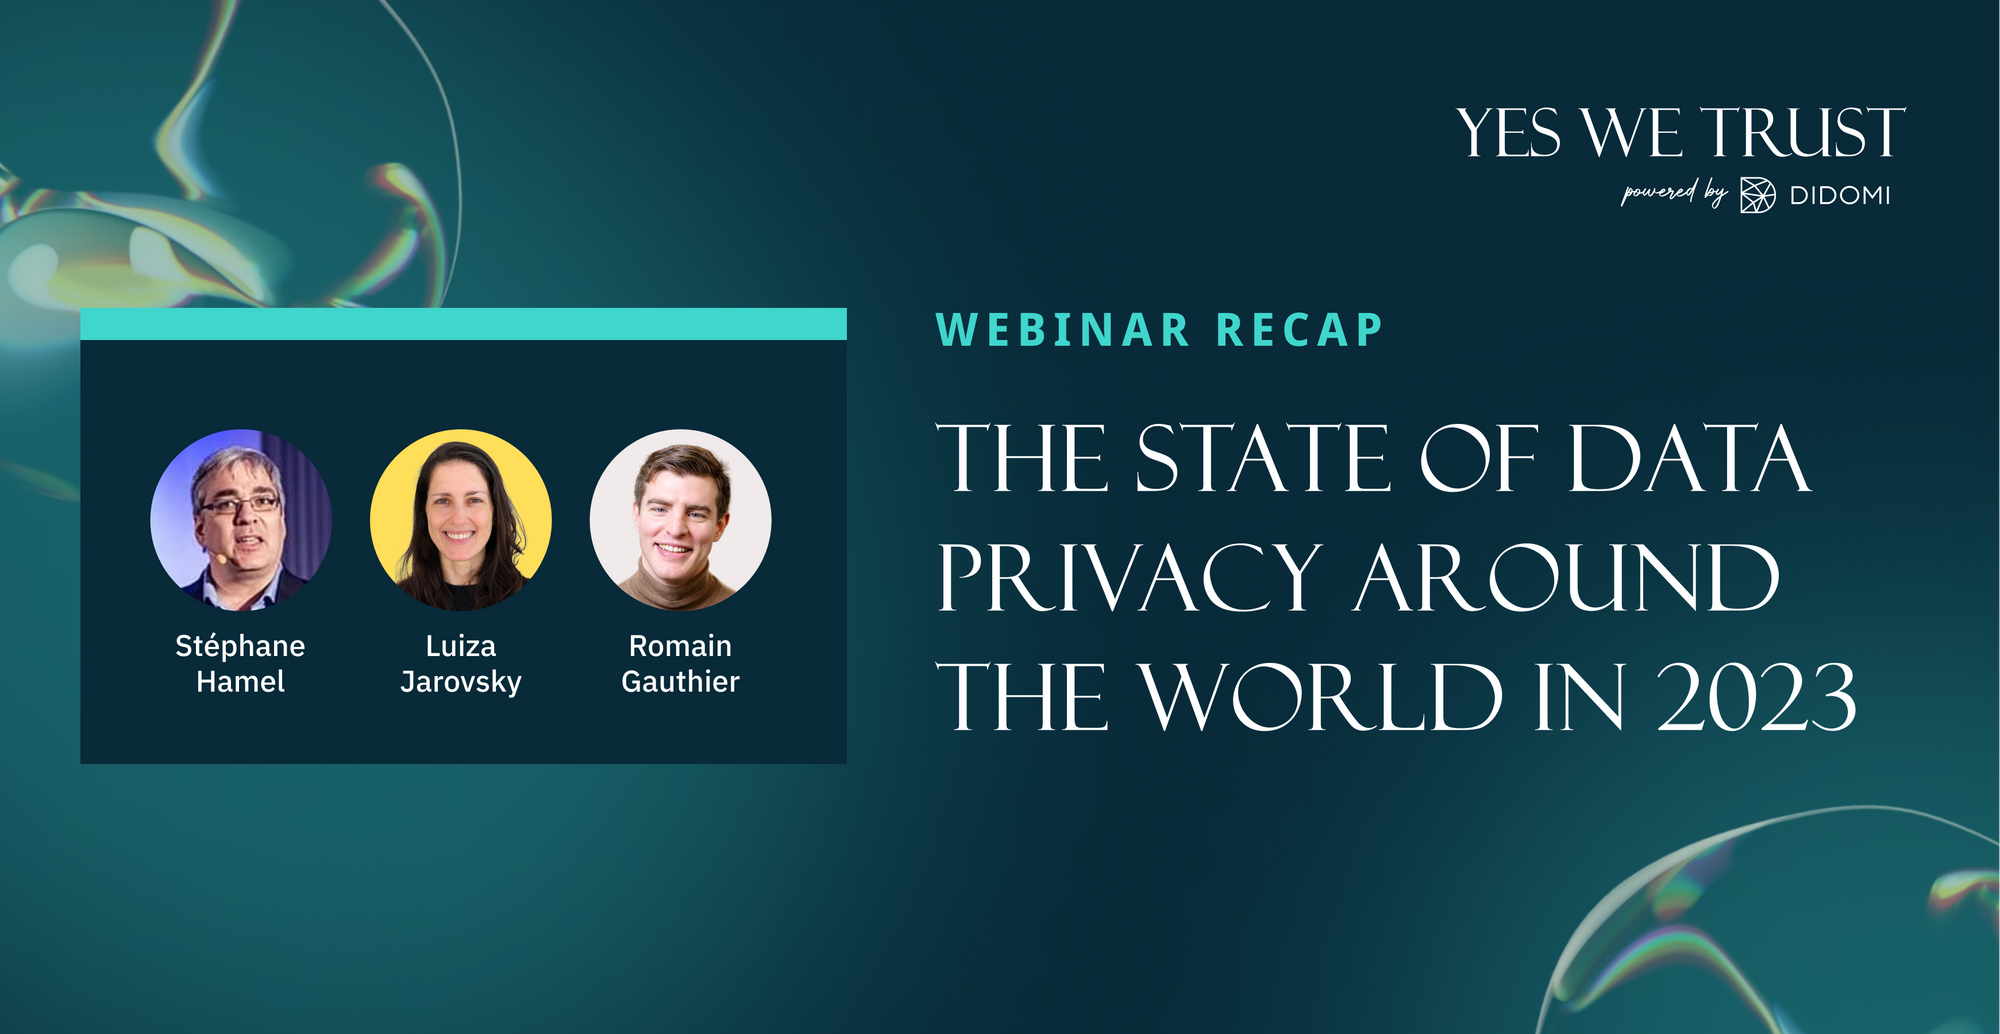 The state of data privacy around the world in 2023 (webinar recap)